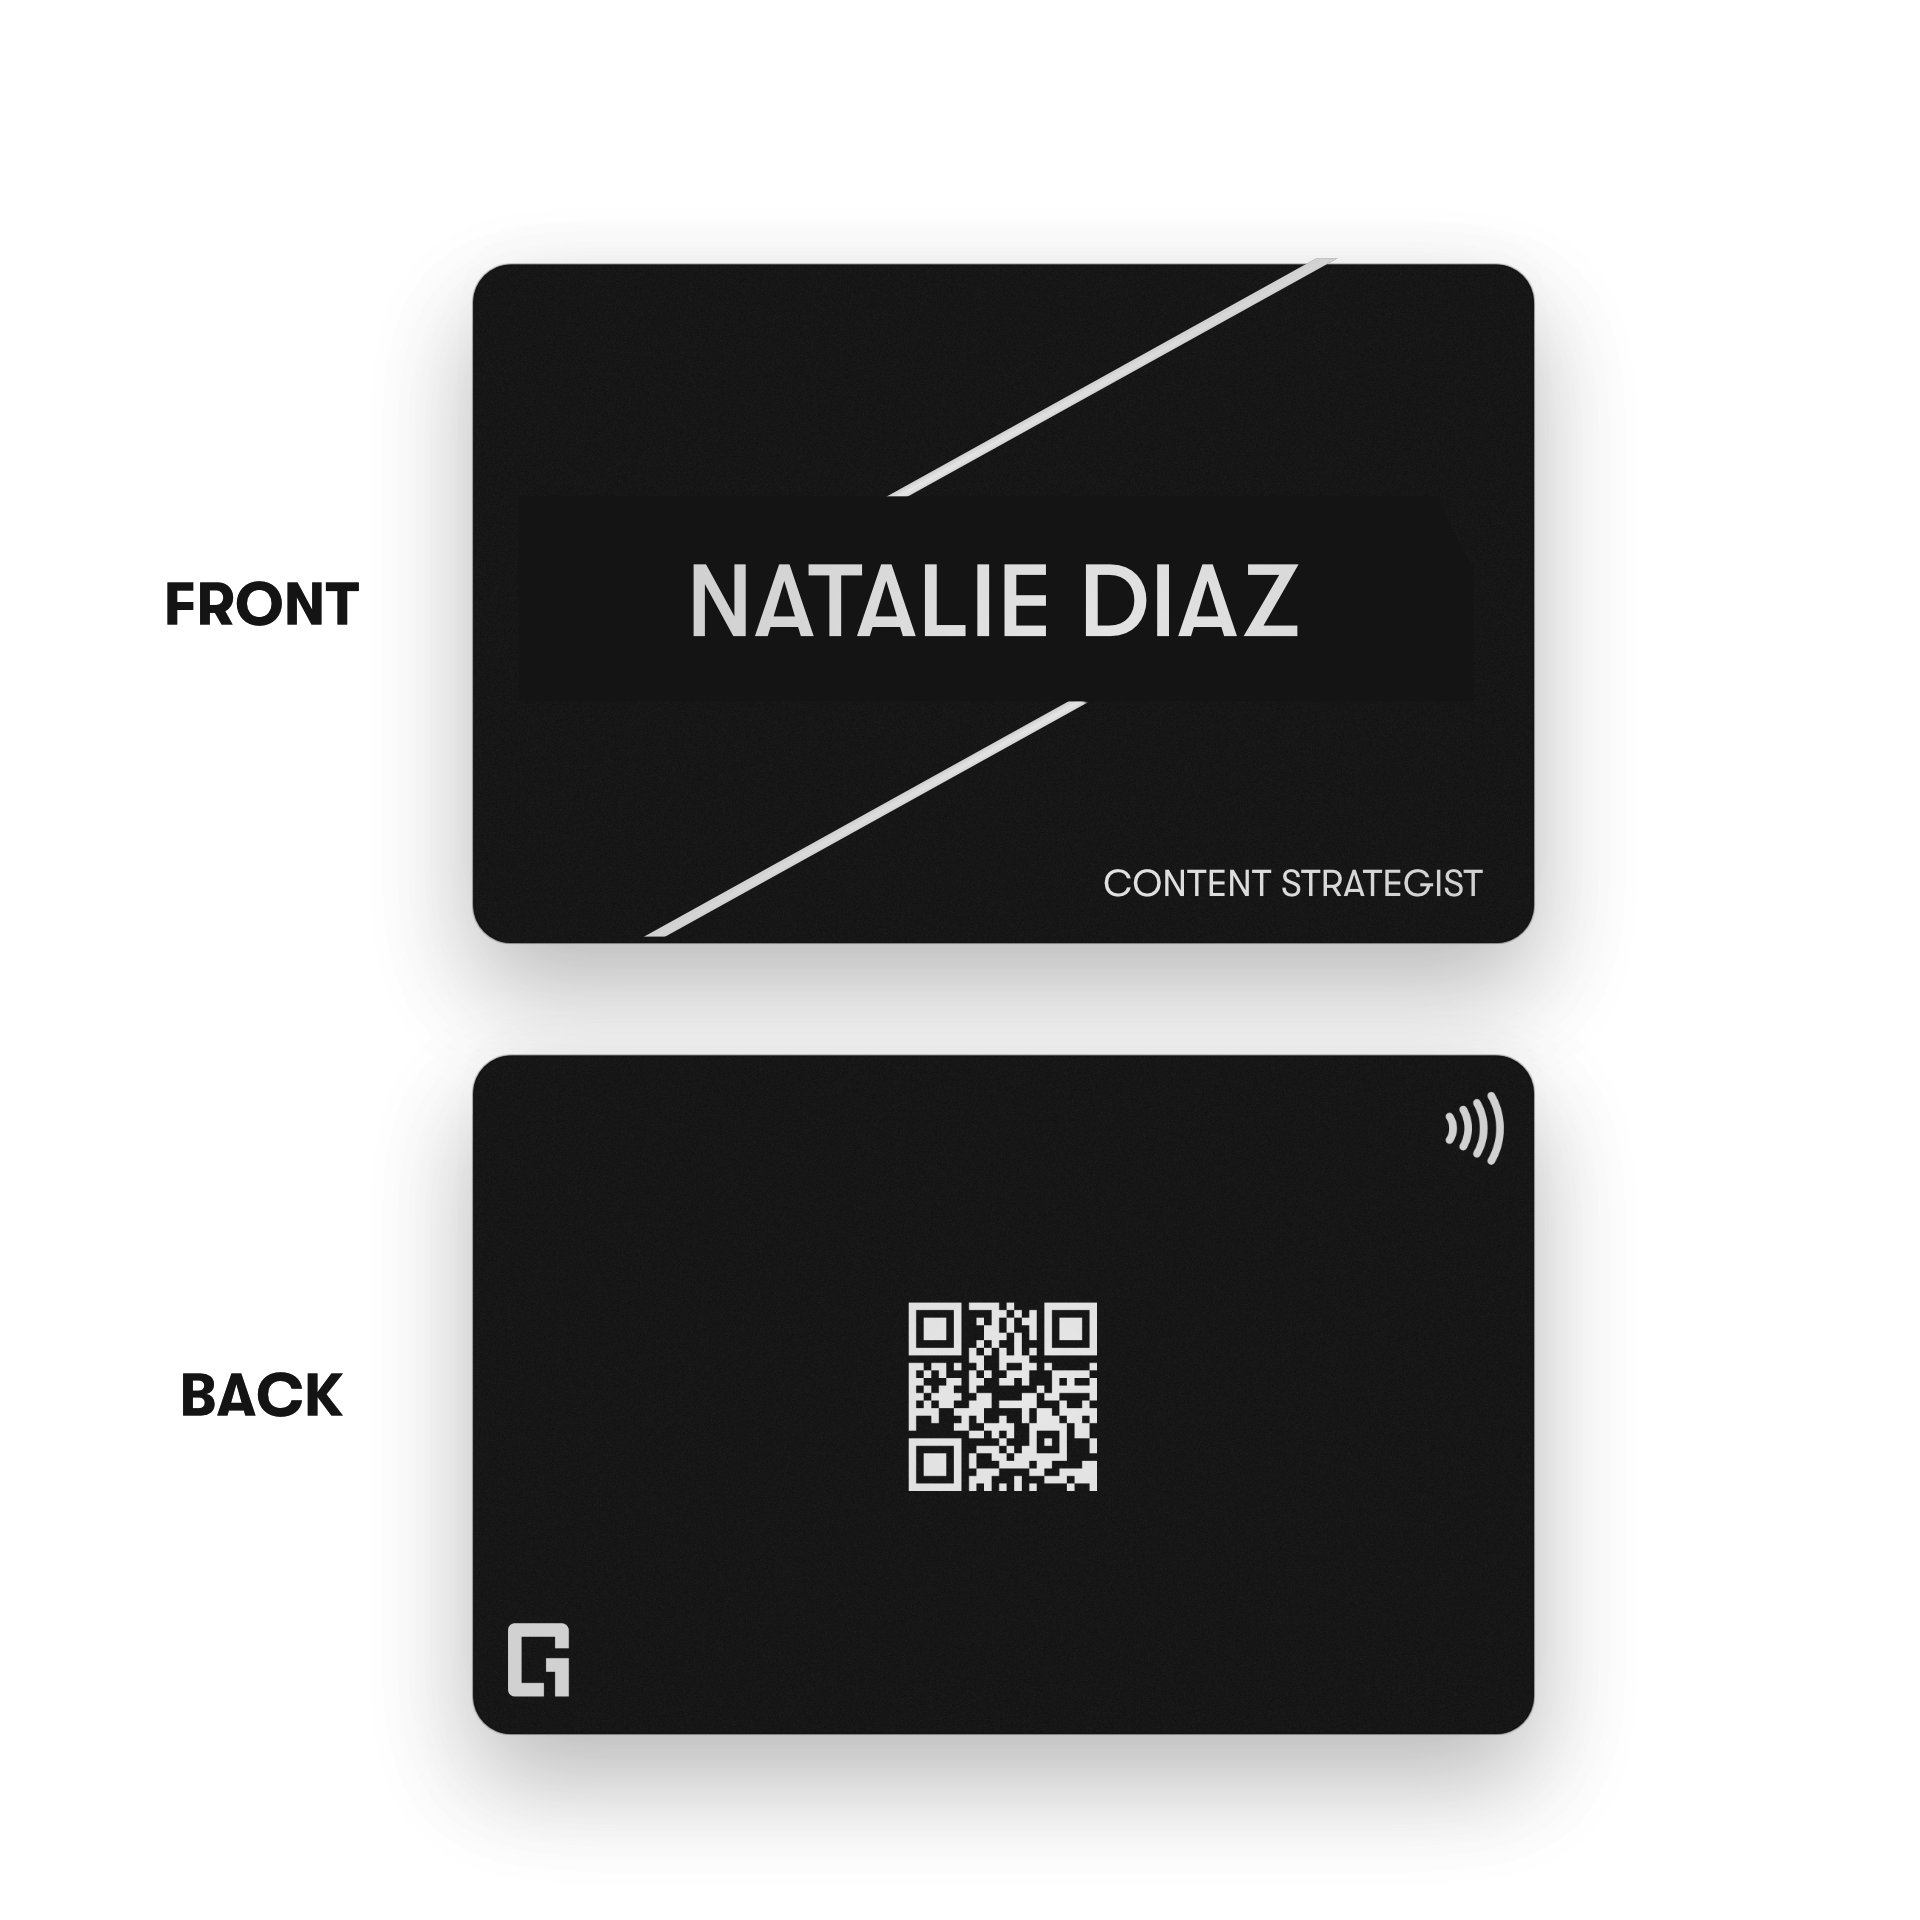 One Good Card: Smart Digital Name Card (Parallels) - Personalised Near Field Communication (NFC) Digital Business Cards designs.